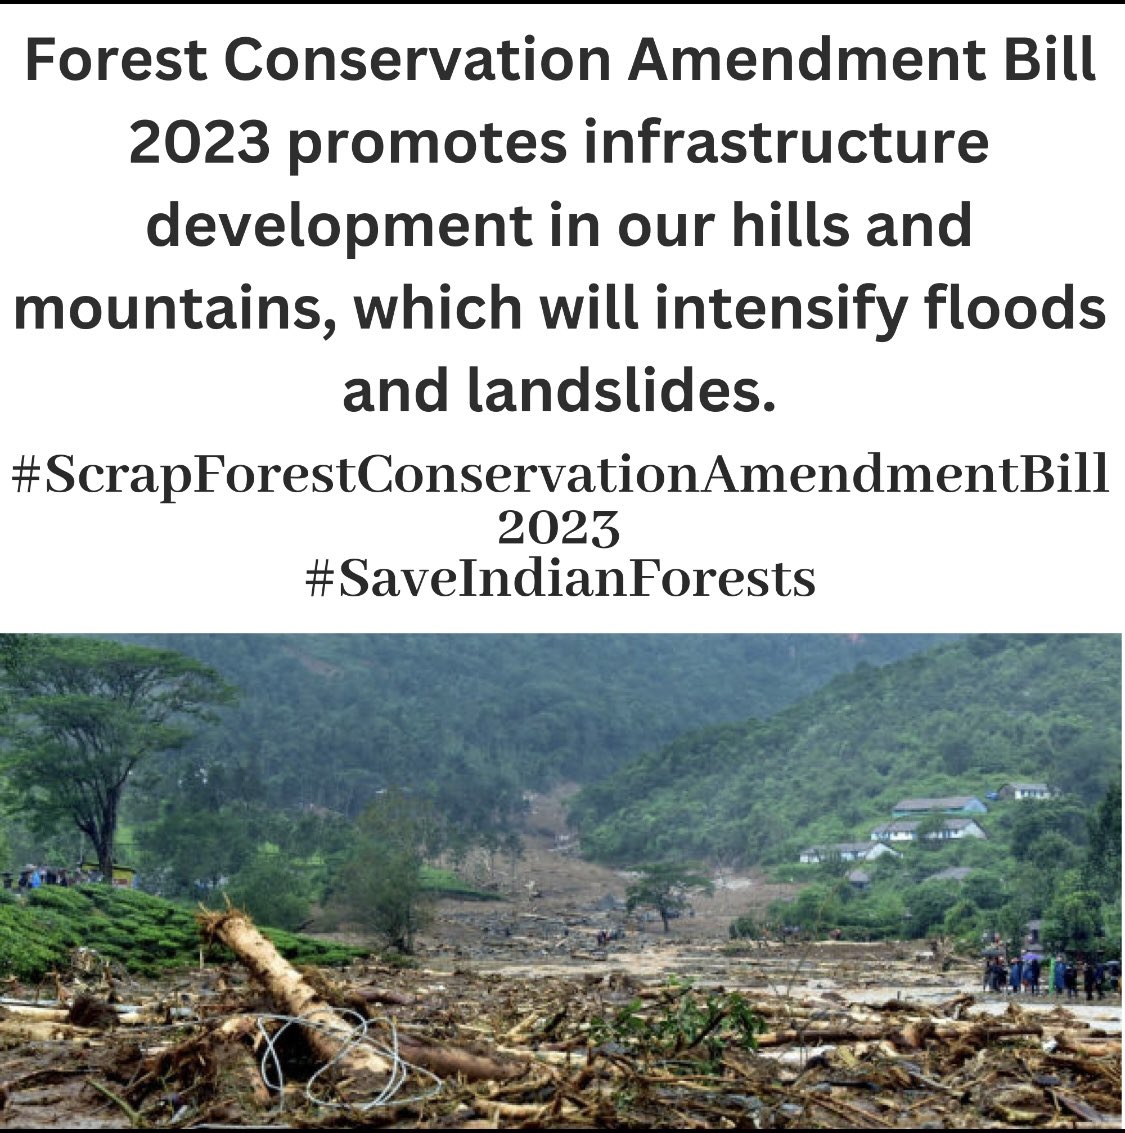 Citizens urge Rajya Sabha MPs not to pass FCA amendment bill that is making radical changes to India’s 43 year old Forest Conservation Act & which is giving Central govt unchecked powers to divert forest land for any purpose as they want
#SaveIndianForests #WithdrawFCAbill2023